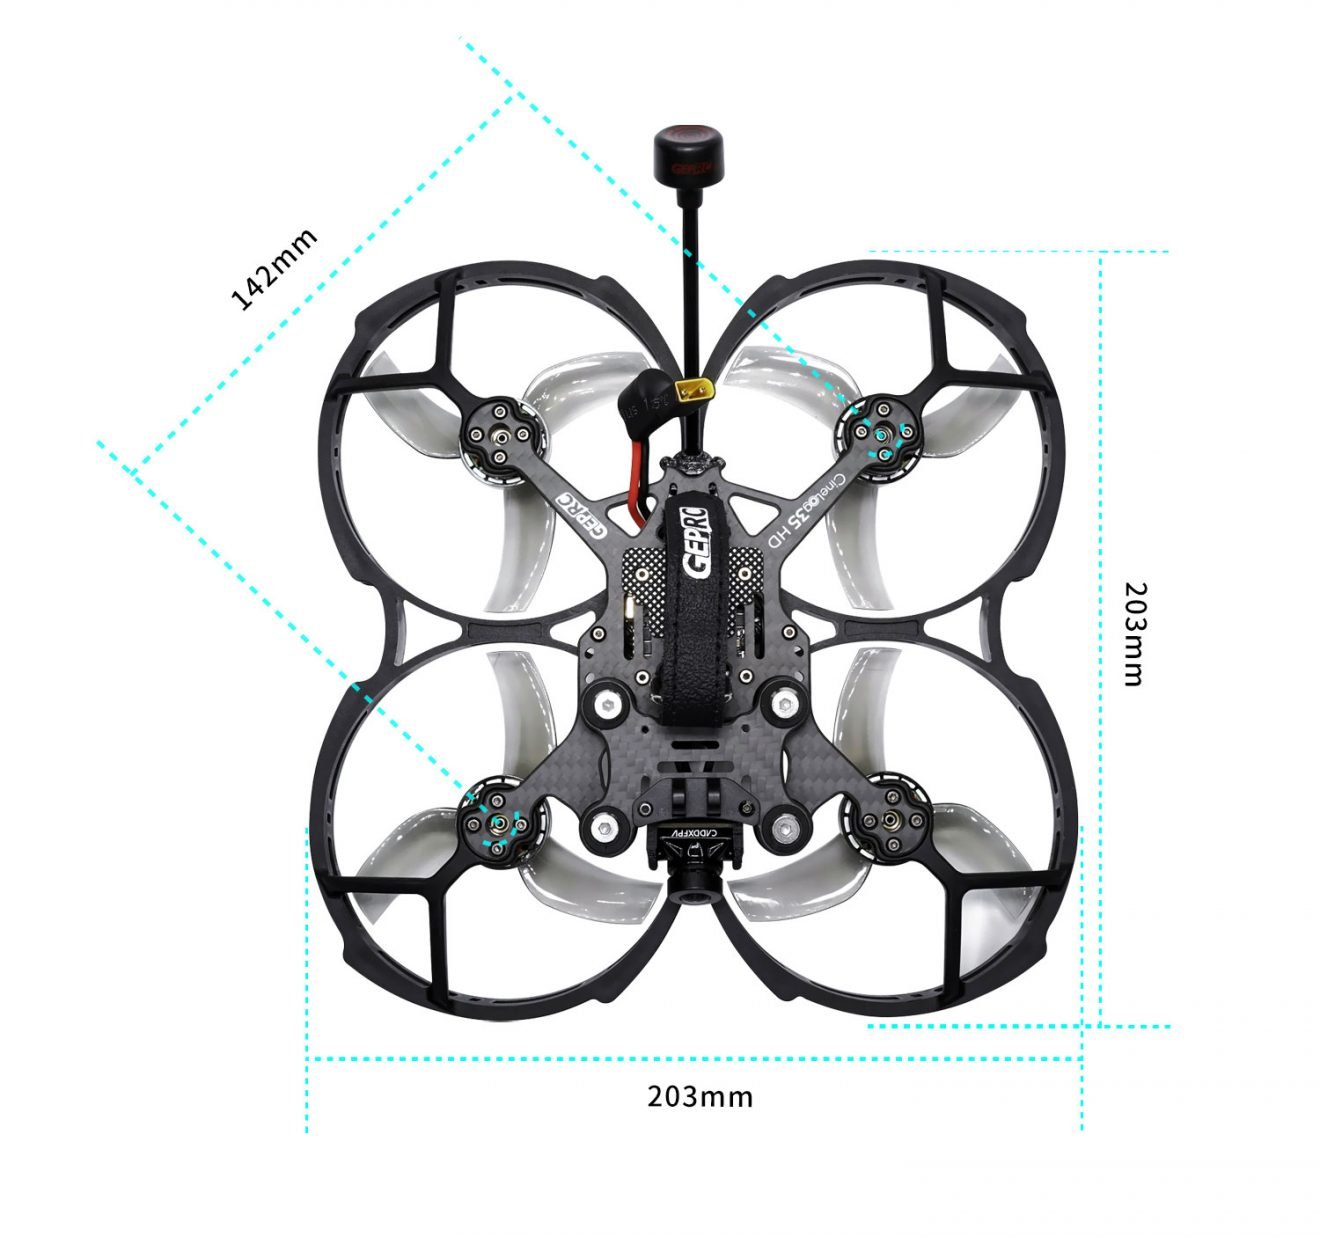 GEPRC CineLog35 FPV Drone, Improving the damping rings, the shooting effect is more stable,clearer and reduce